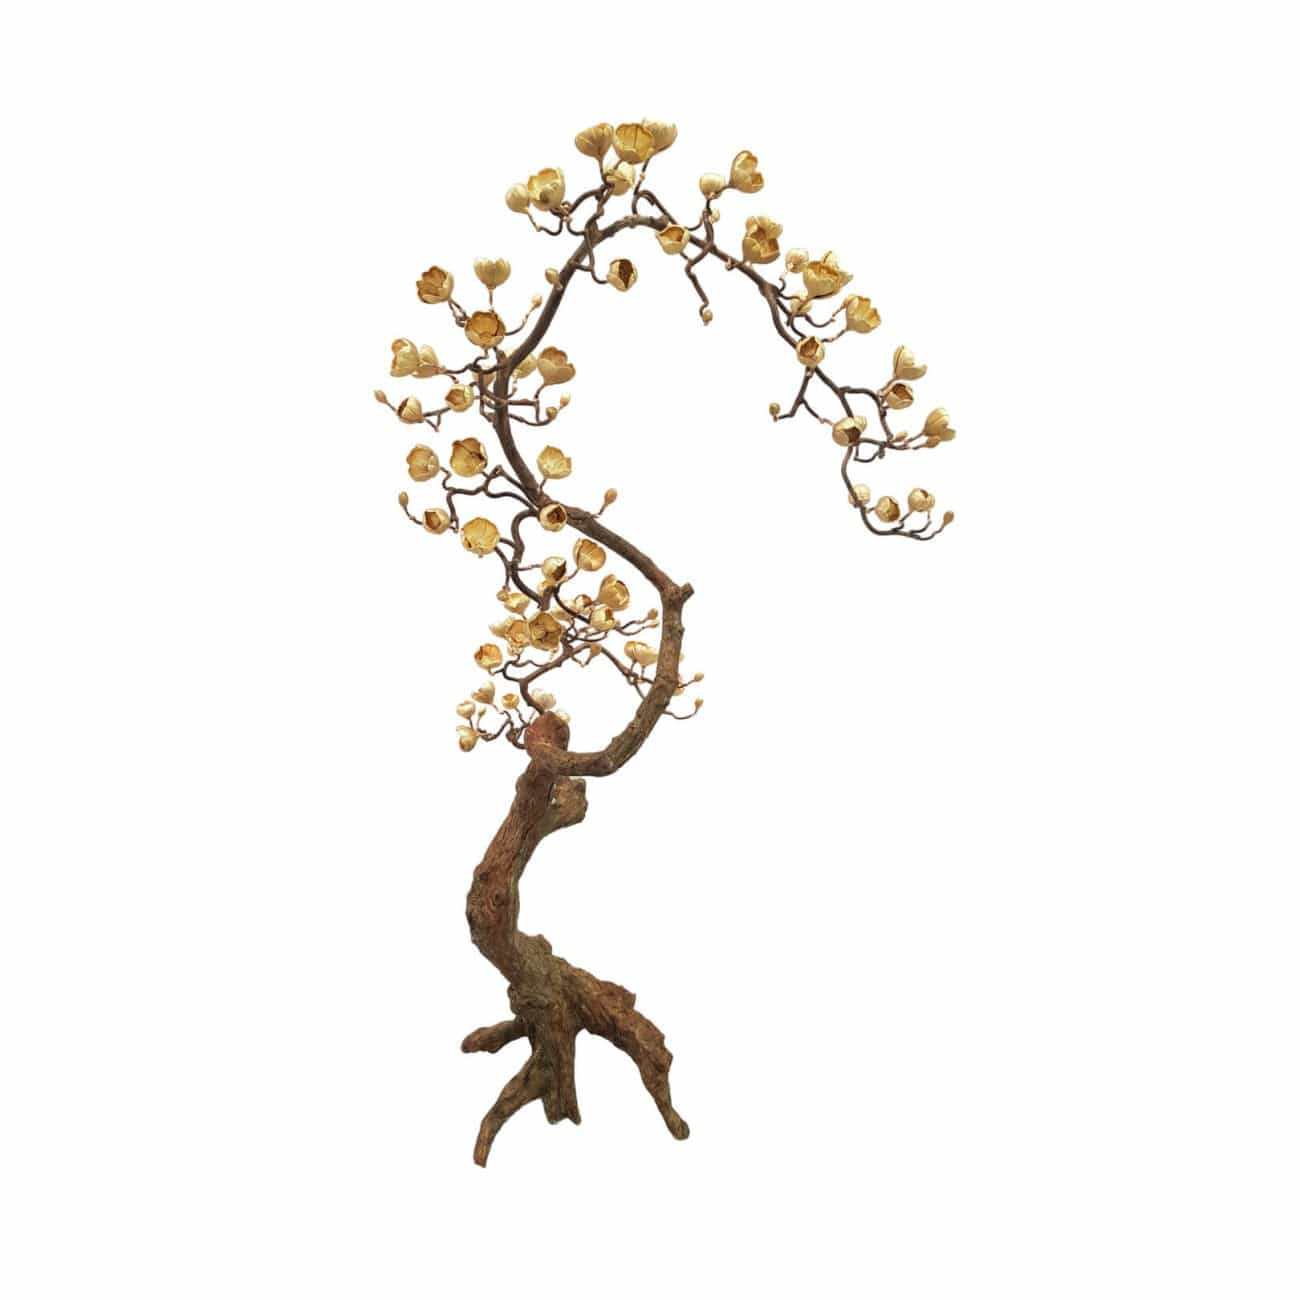 Eccotrading Design London Accessories Bronze Blossom Sculpture Large House of Isabella UK